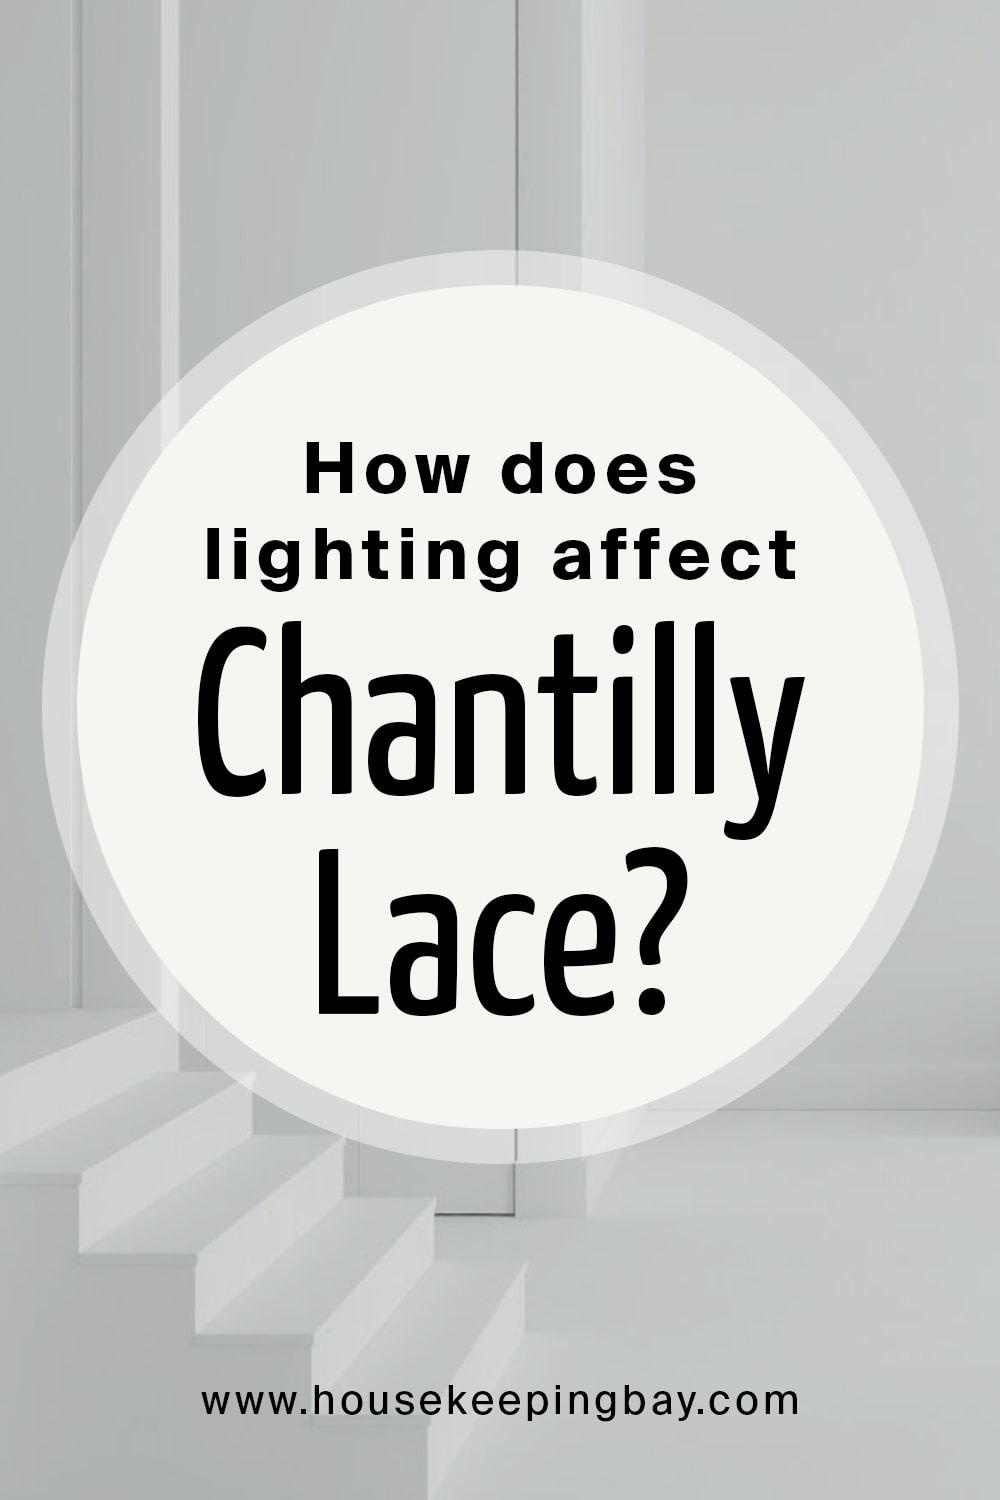 How does lighting affect Chantilly Lace